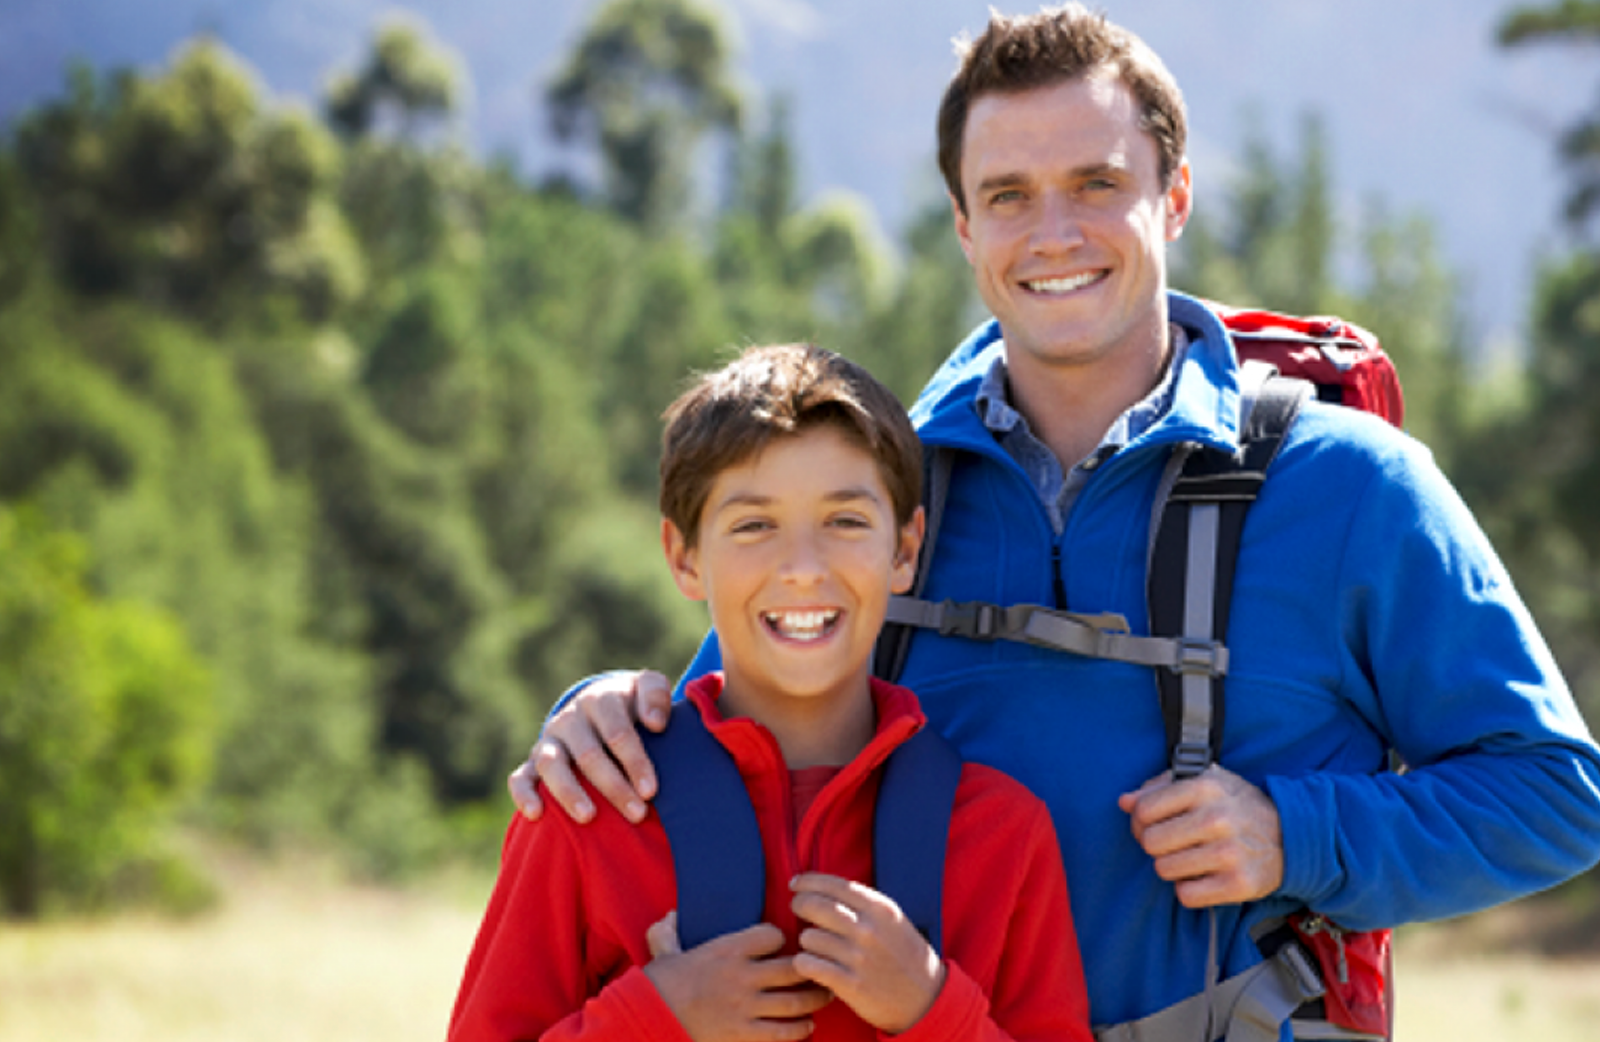 A father with his arm on his son's shoulder and son smile in a park setting.